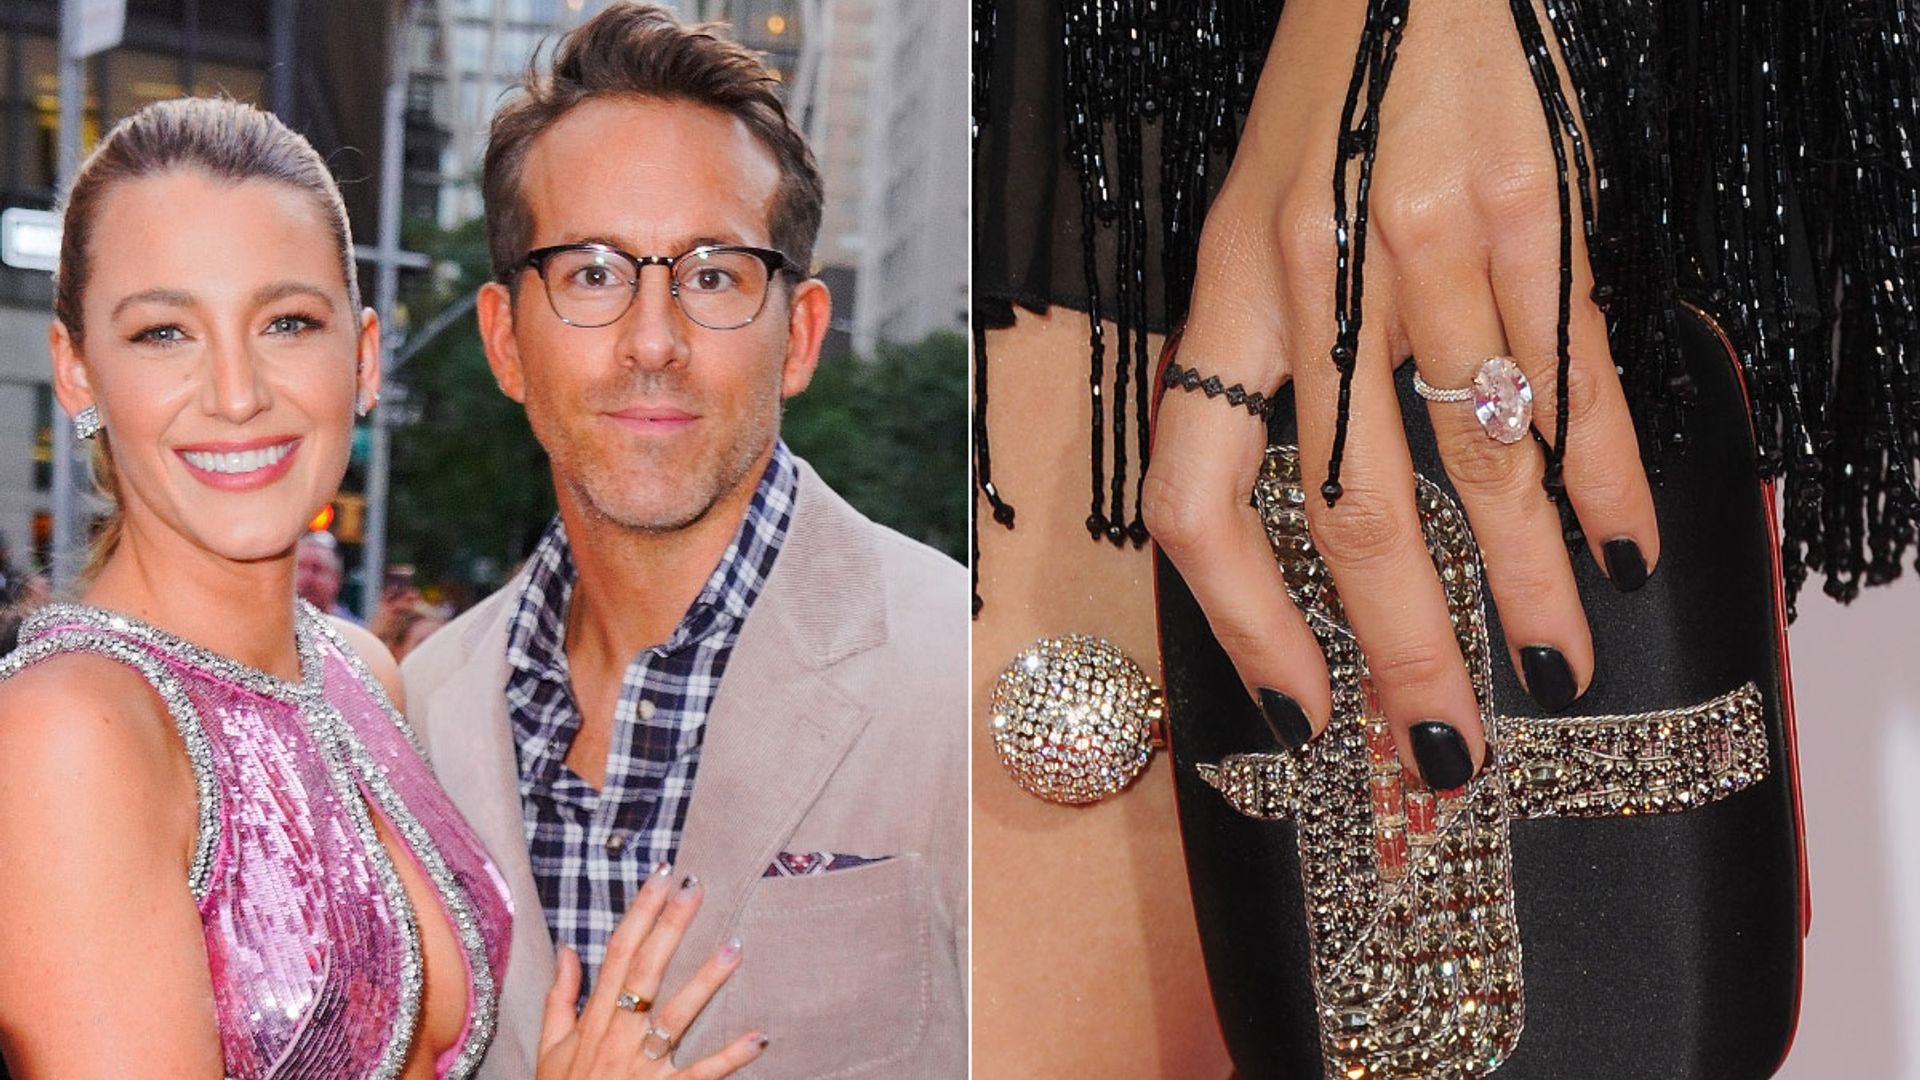 Blake Lively's iconic $2m engagement ring from Ryan Reynolds holds a special secret